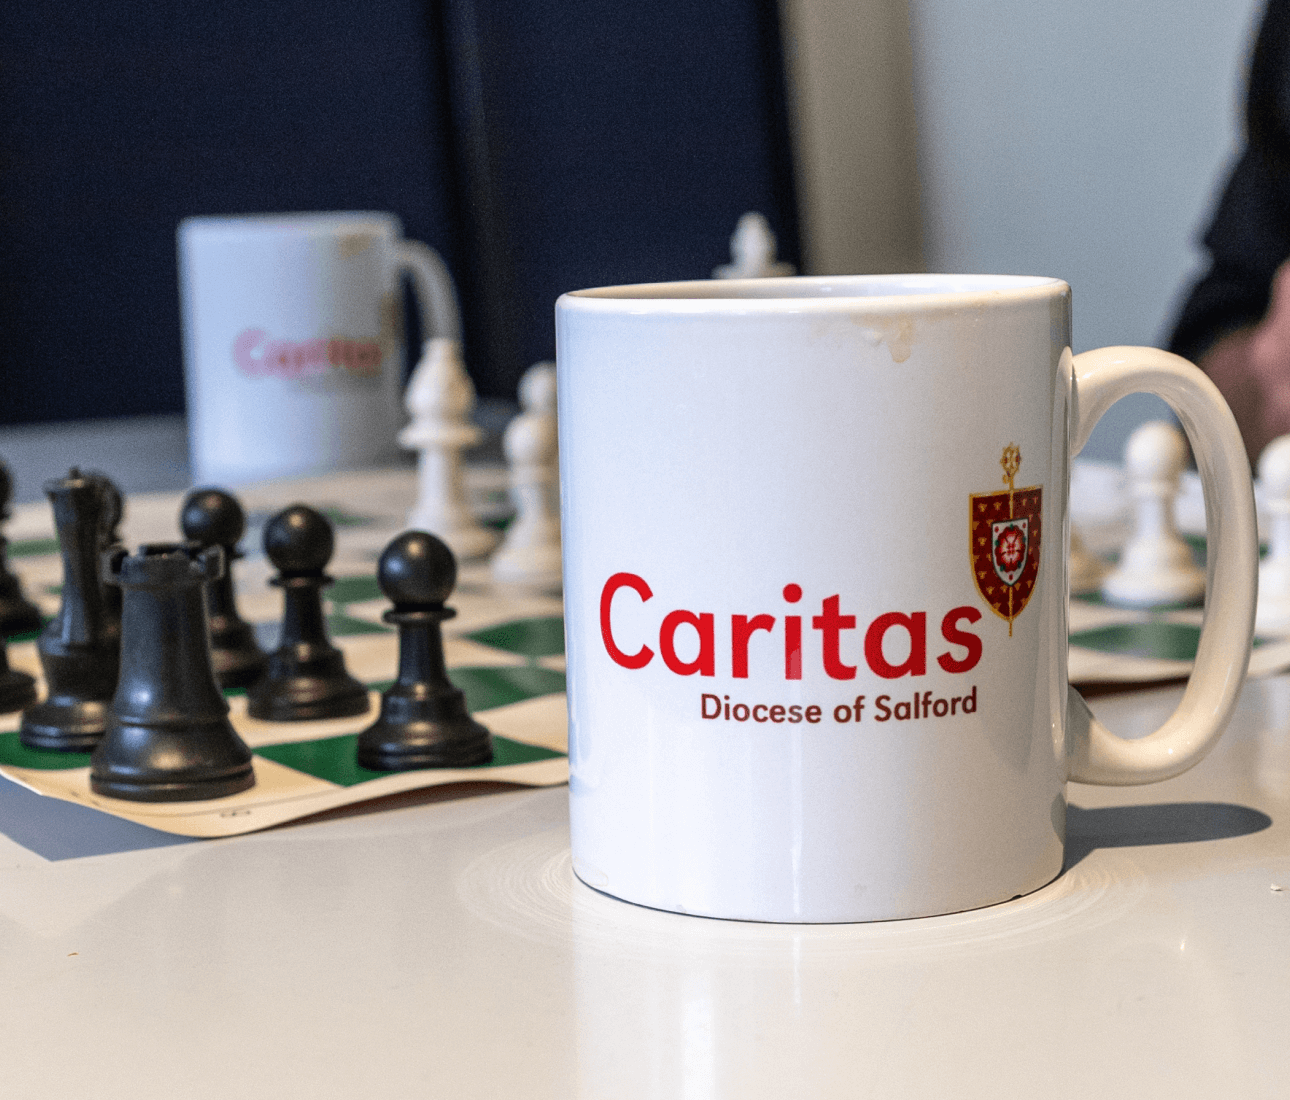 White mug with caritas logo on it. Chess board seen in background